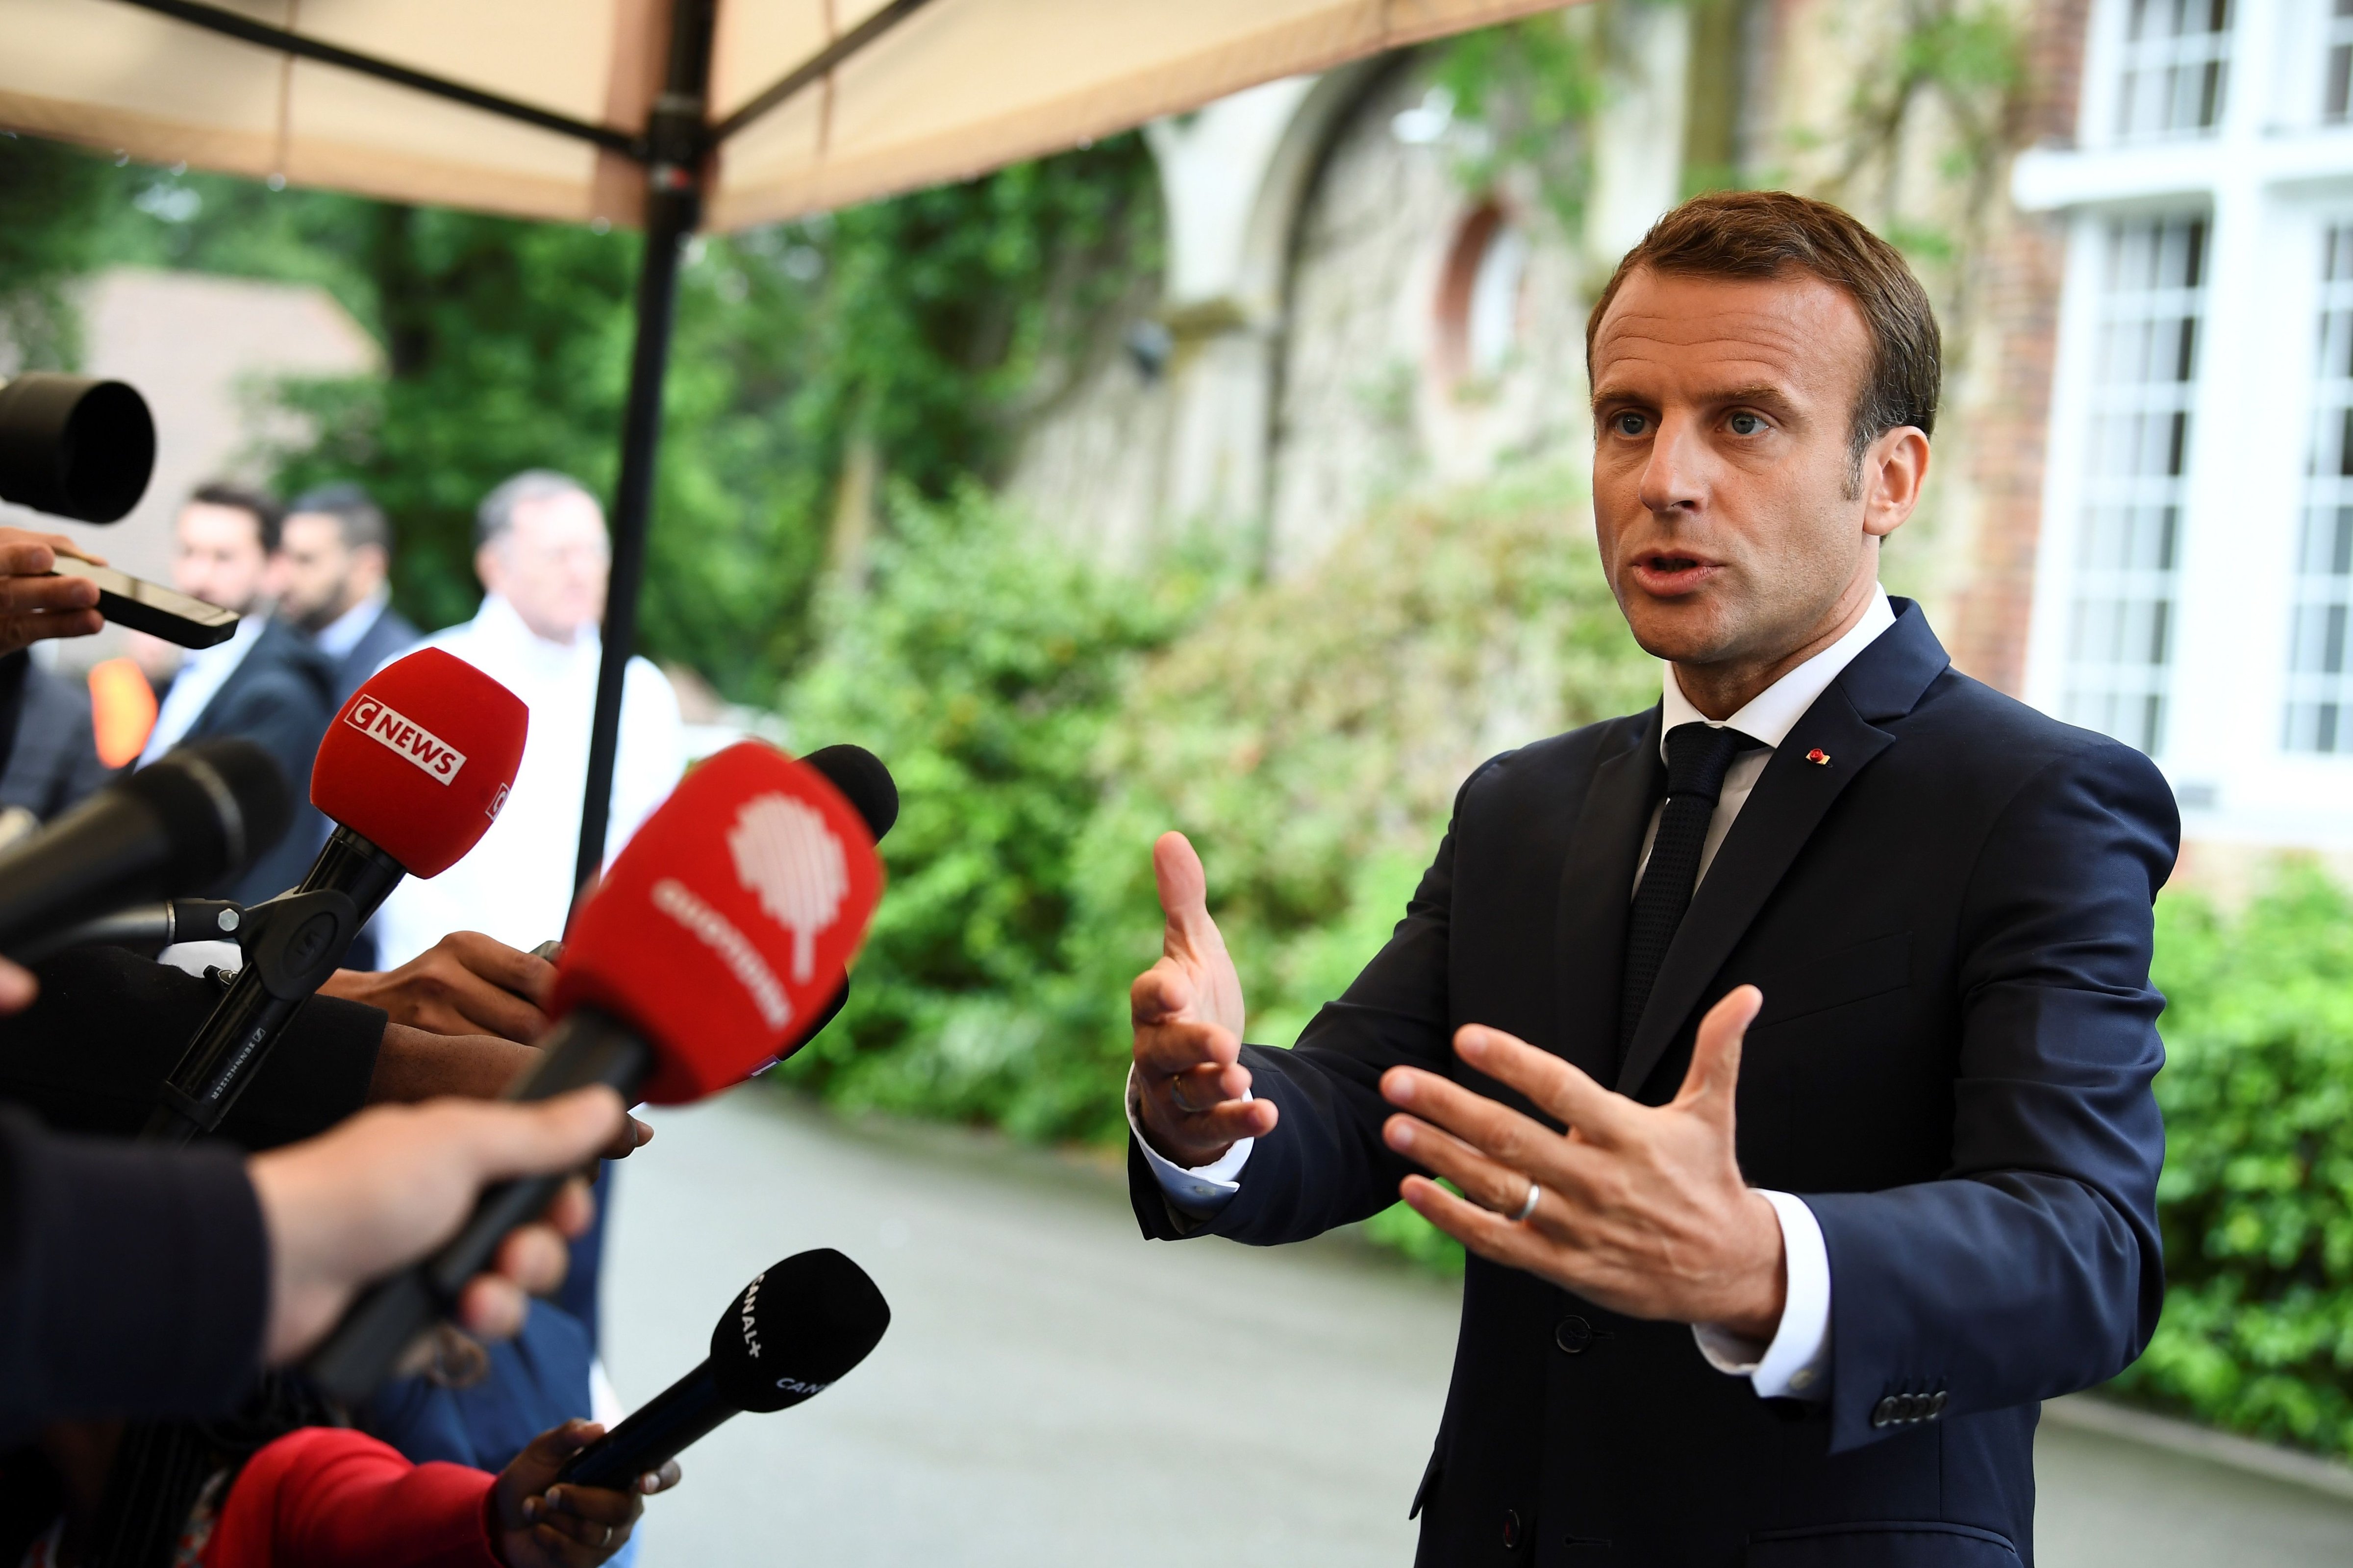 French President Emmanuel Macron speaks to the press during a visit in Clairefontaine-en-Yvelines on June 5, 2018. (Franck Fife – AFP/Getty Images)